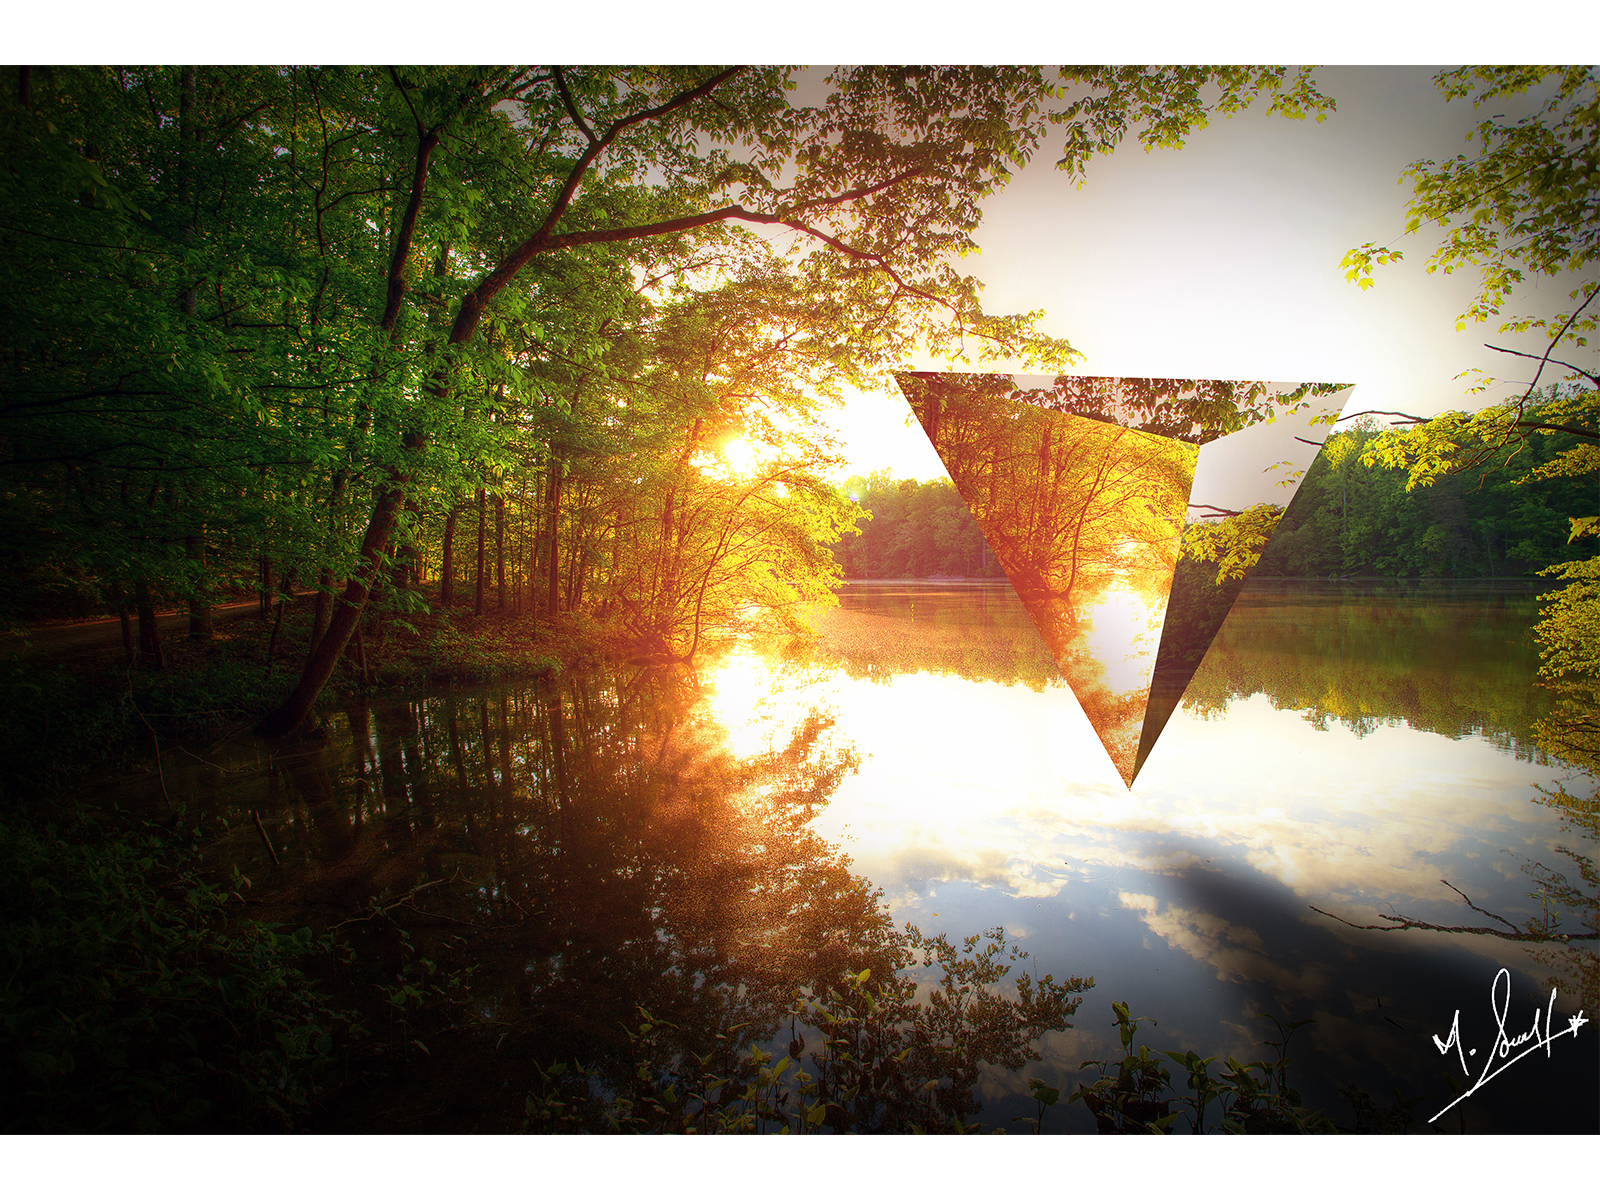 Prism Reflection with Lake by Muhammad Soban on Dribbble